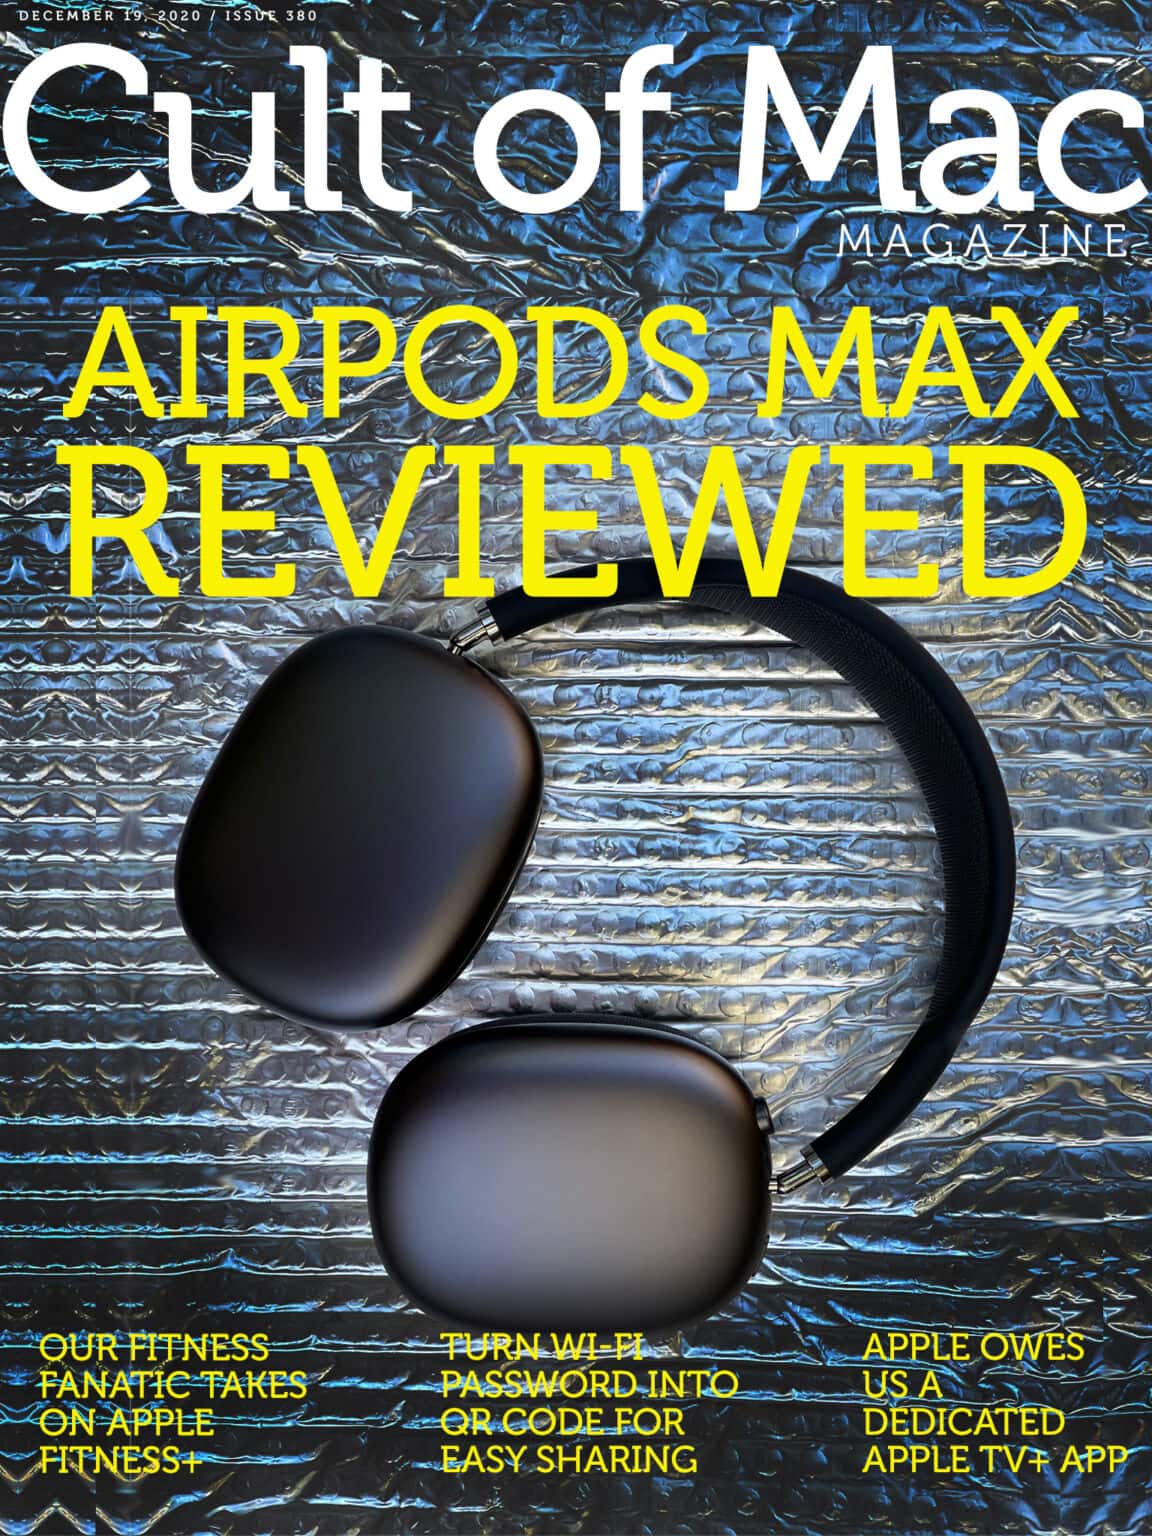 In-depth reviews of AirPods Max and Apple Fitness+ in Cult of Mac Magazine.